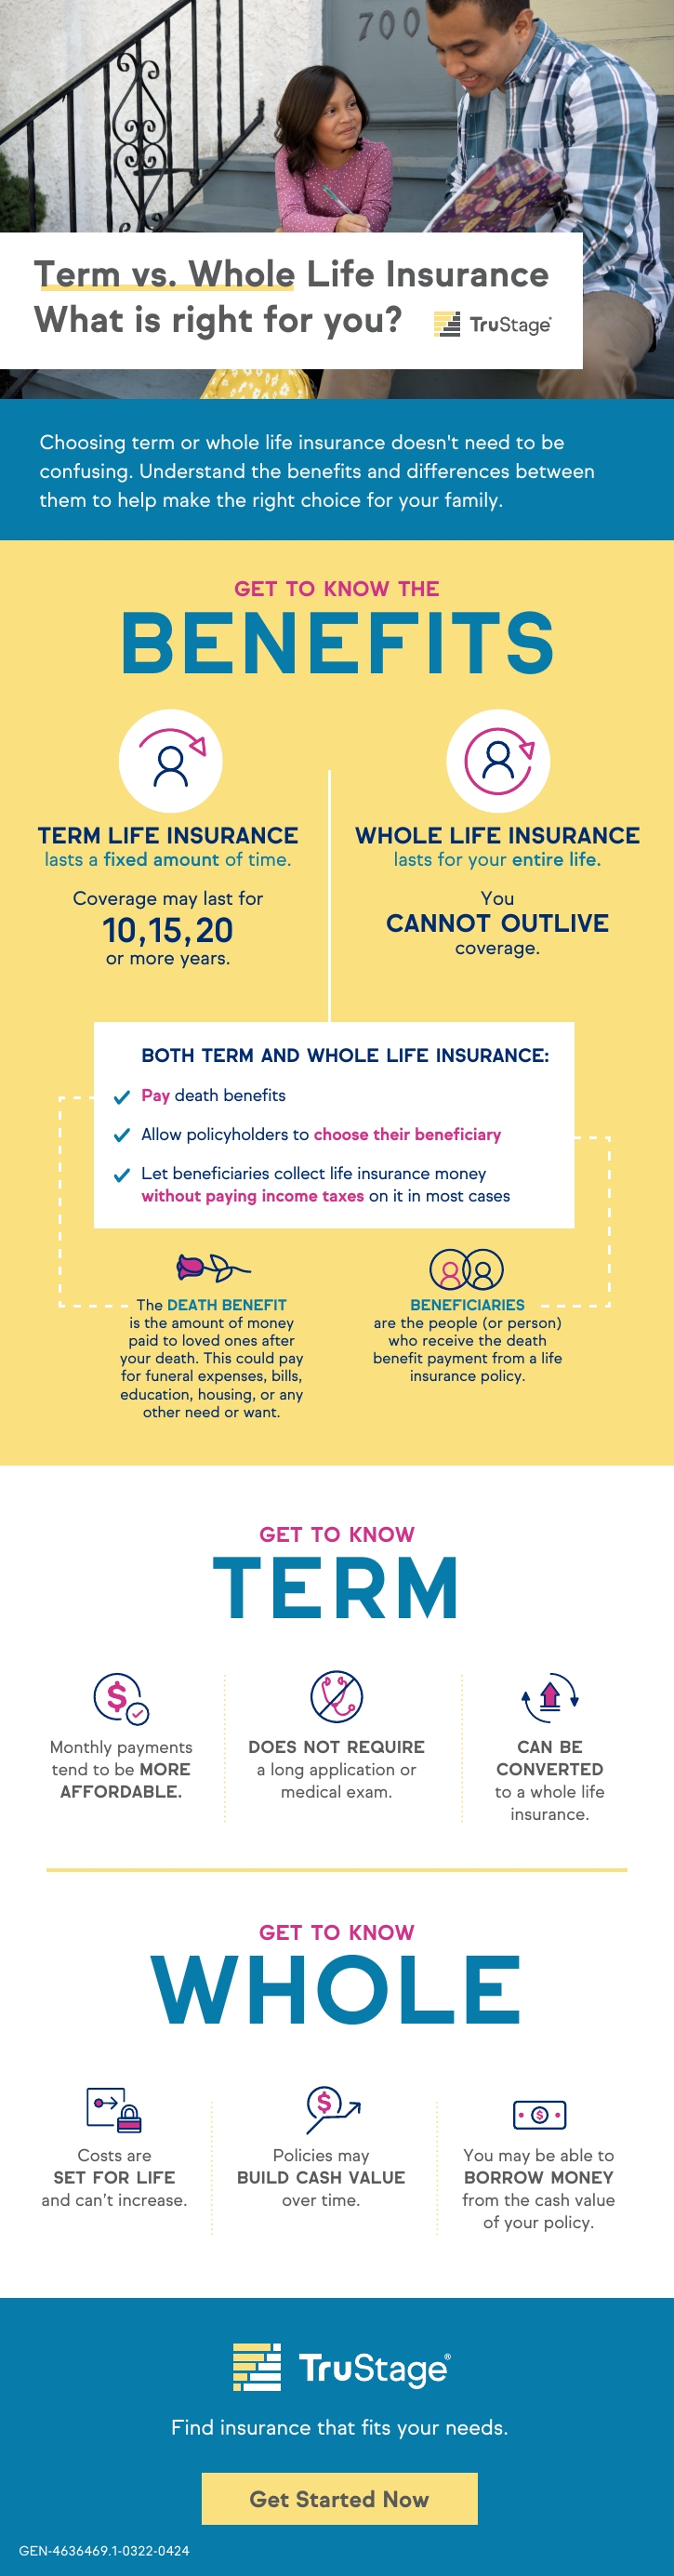 Learn the difference between term life and whole life insurance.